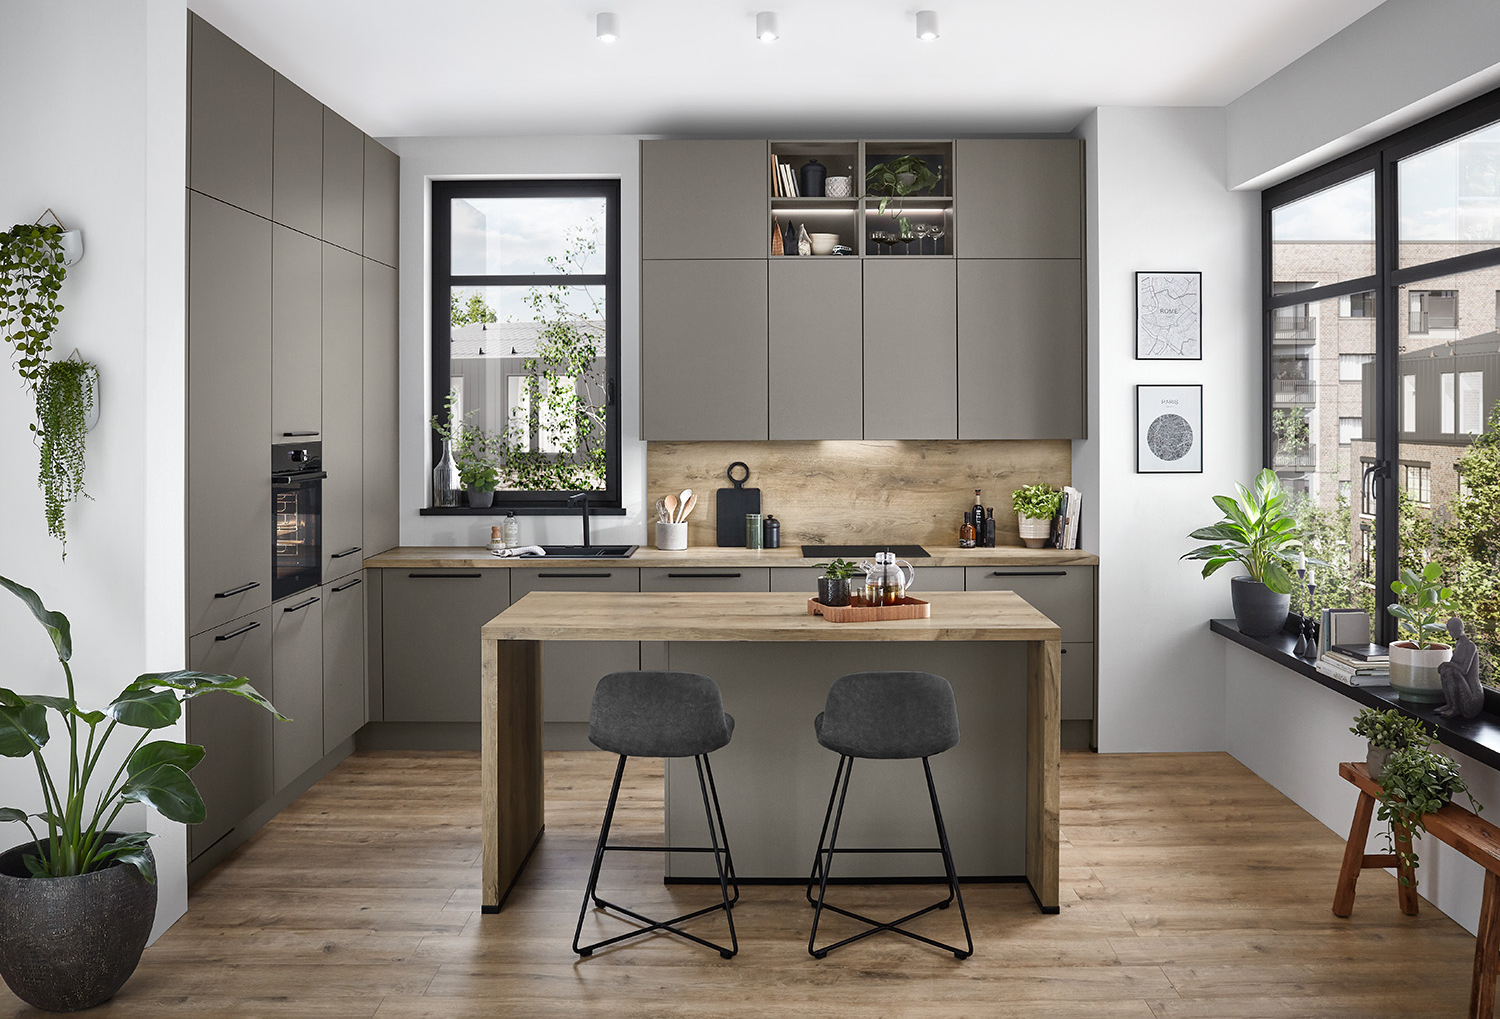 Modern kitchen design with sleek gray cabinets, wooden accents, integrated appliances, and a central island with stools, illuminated by natural light from large windows.